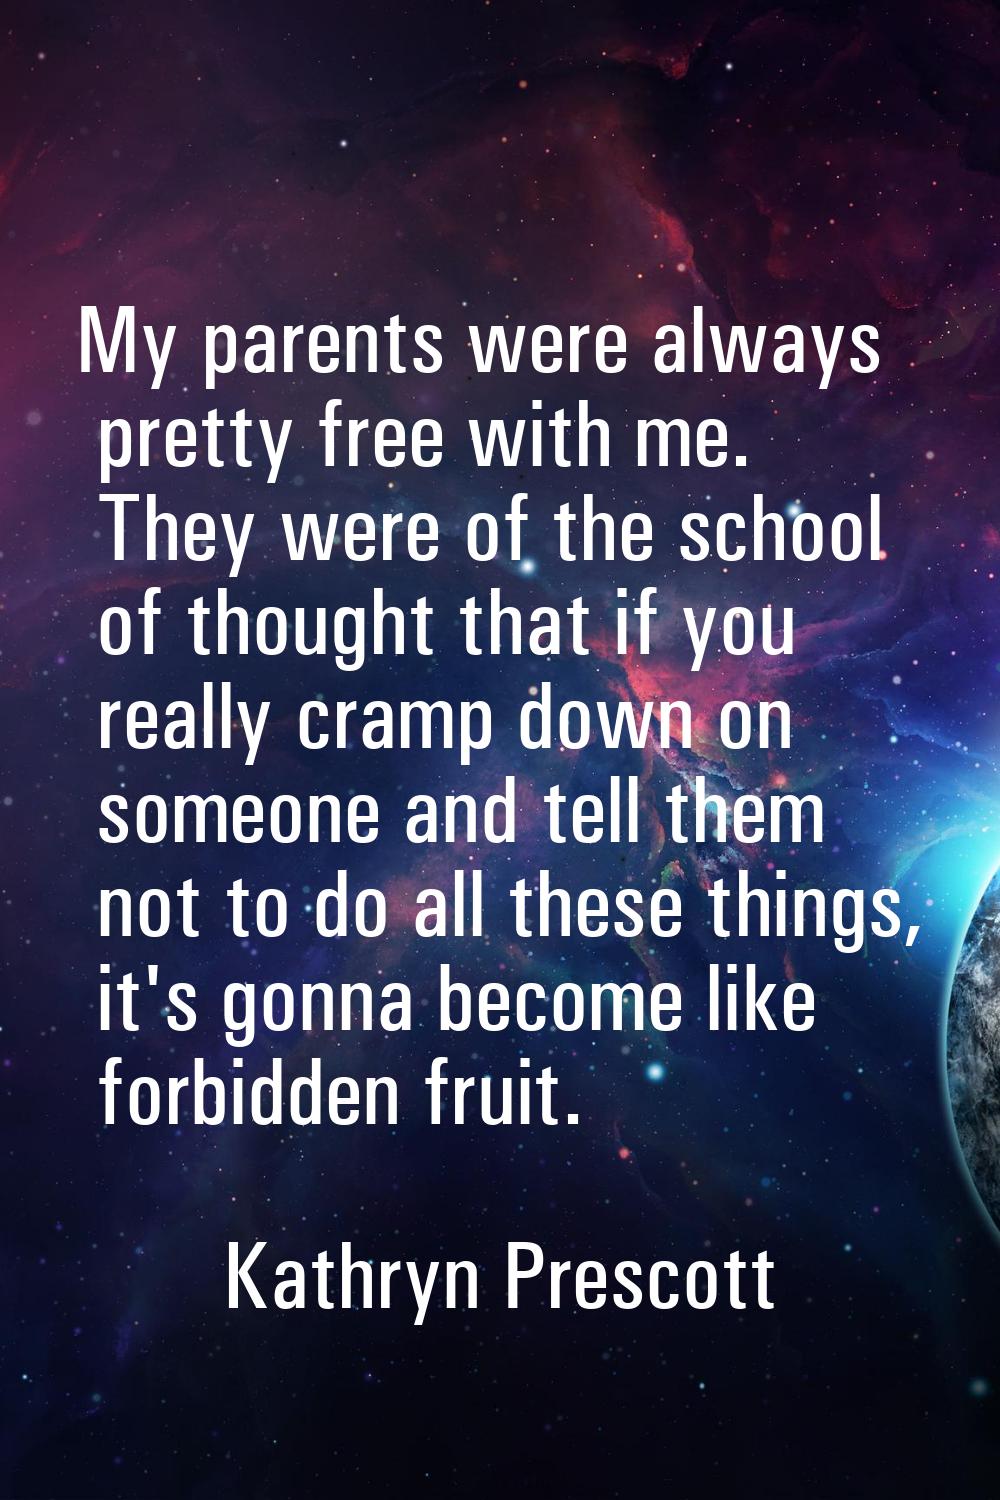 My parents were always pretty free with me. They were of the school of thought that if you really c